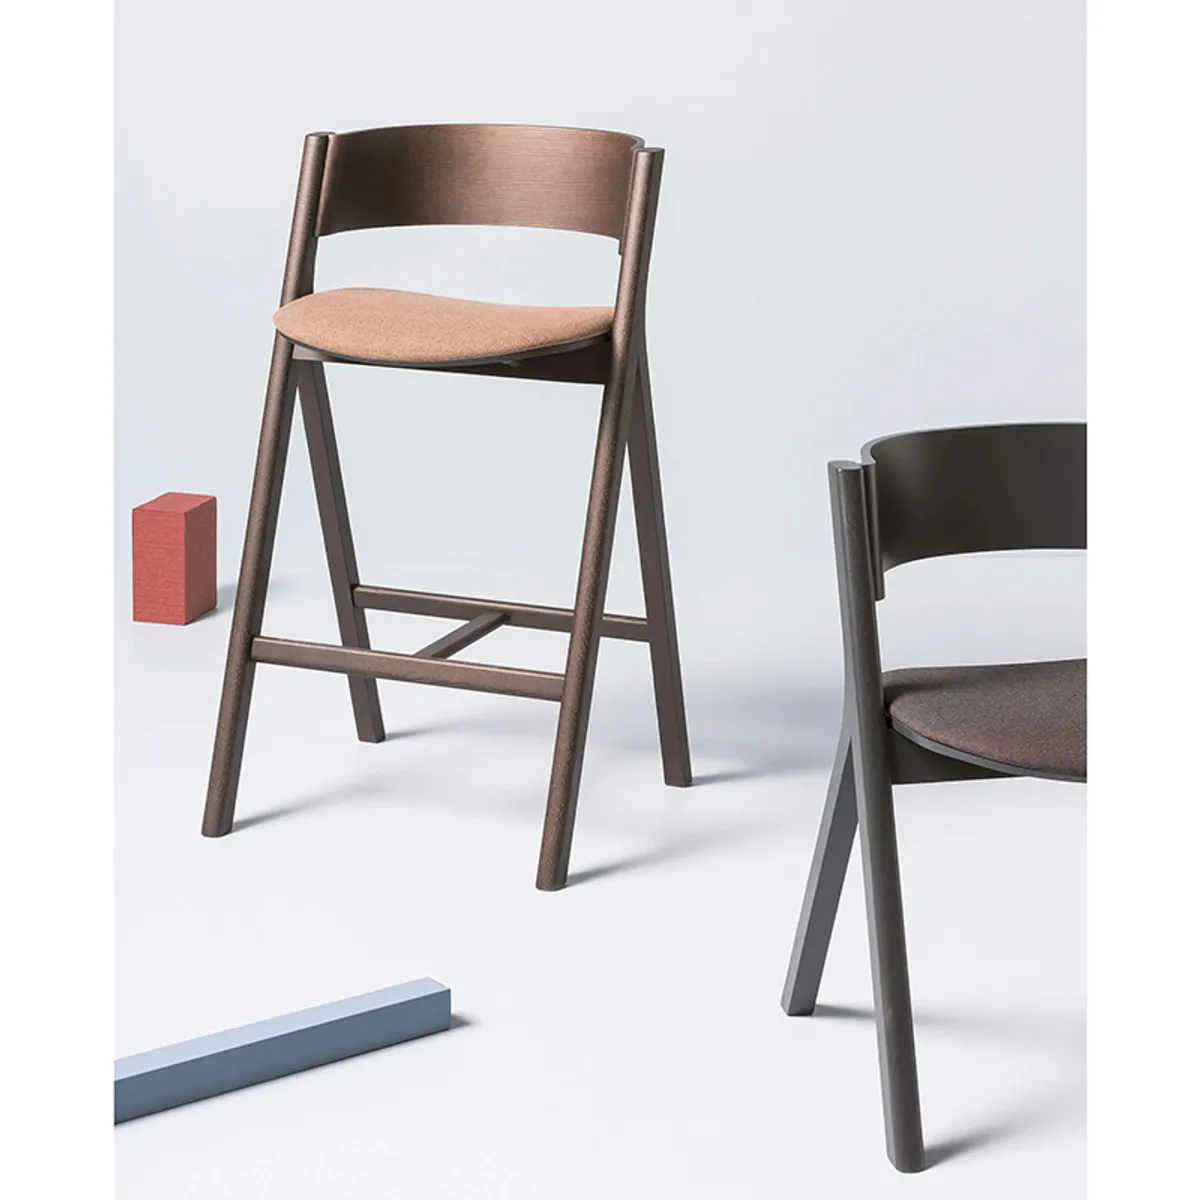 Folly Soft Bar Stool 3 23 0 Inside Out Contracts